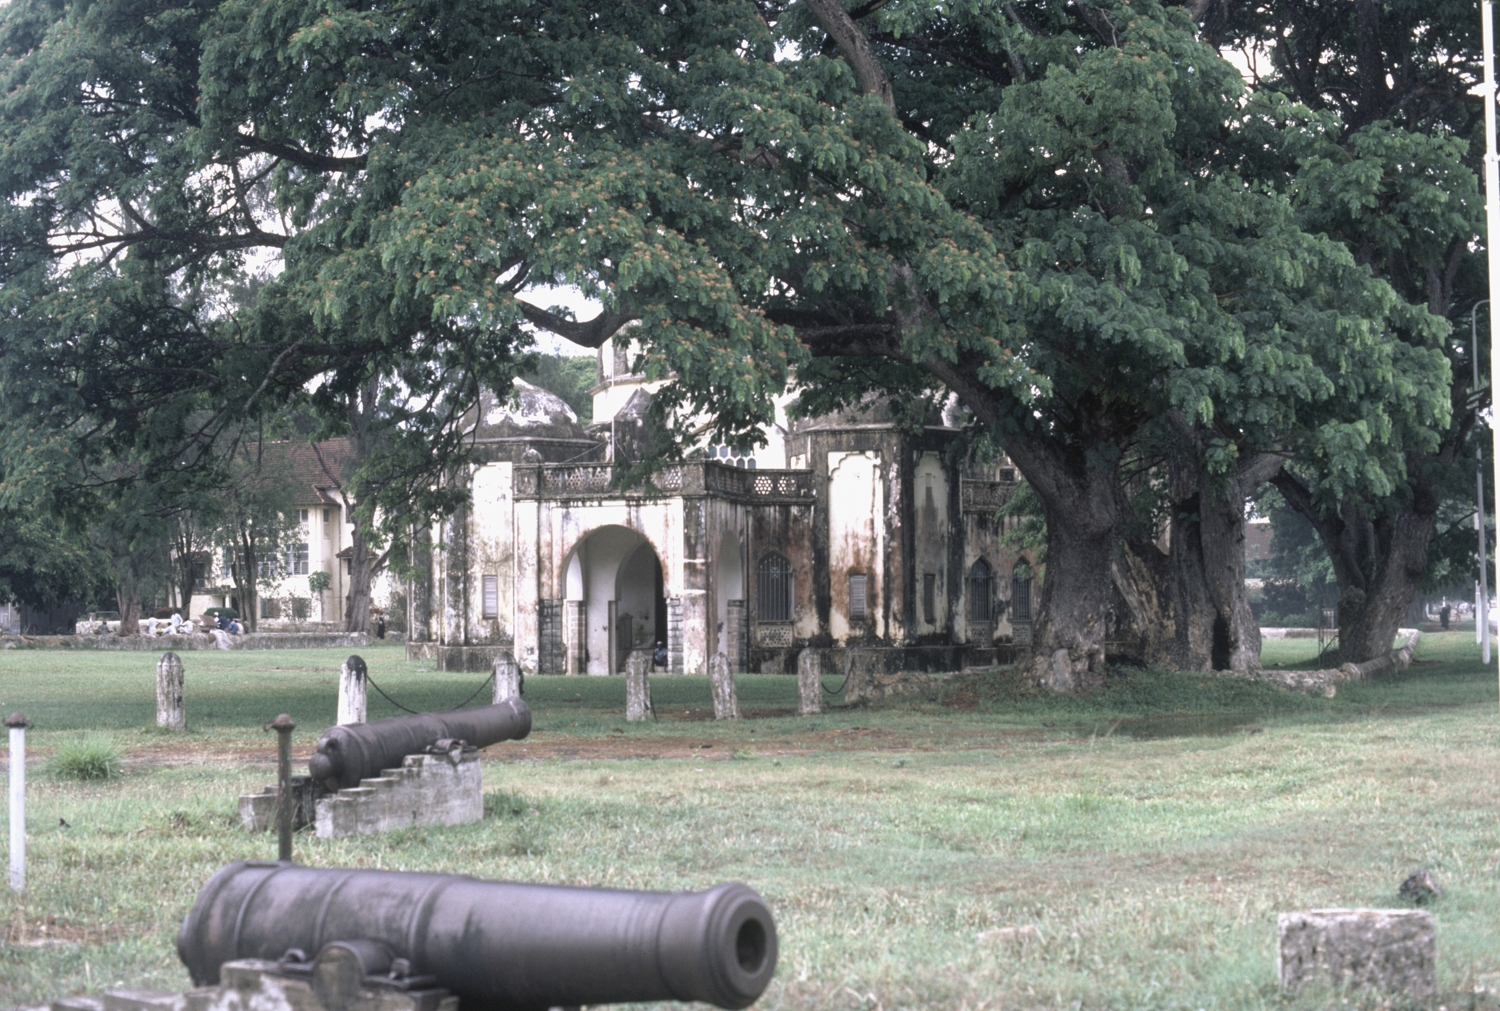 Partial view of museum, with cannons in foreground